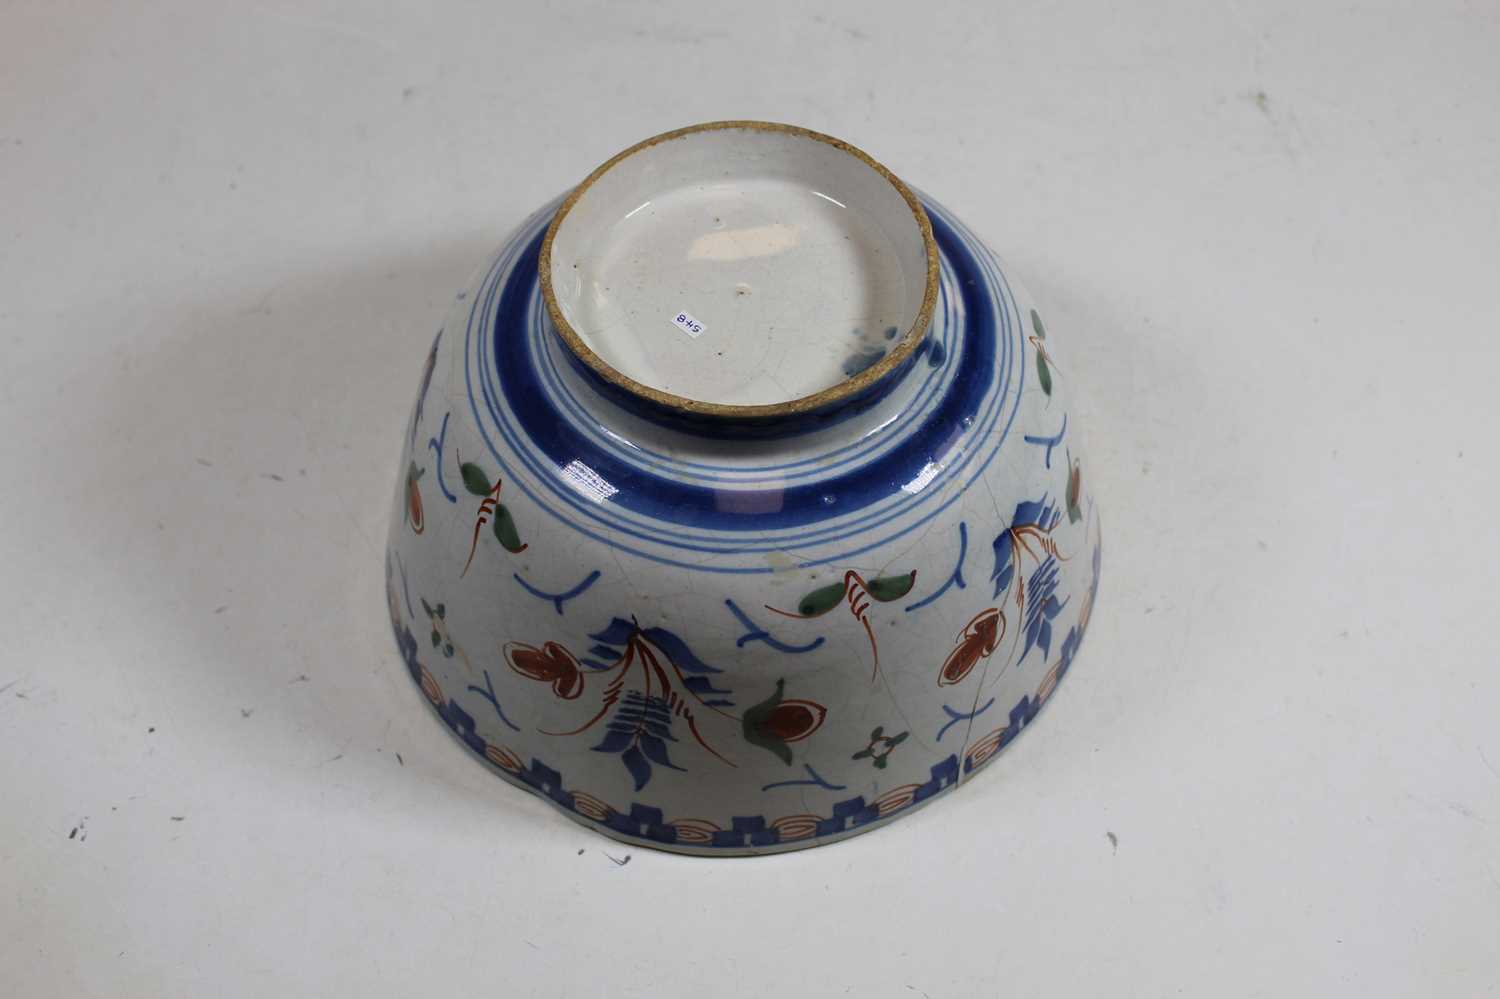 An 18th century English Delft bowl, decorated in shades of blue, brown and green, on circular foot - Image 3 of 3